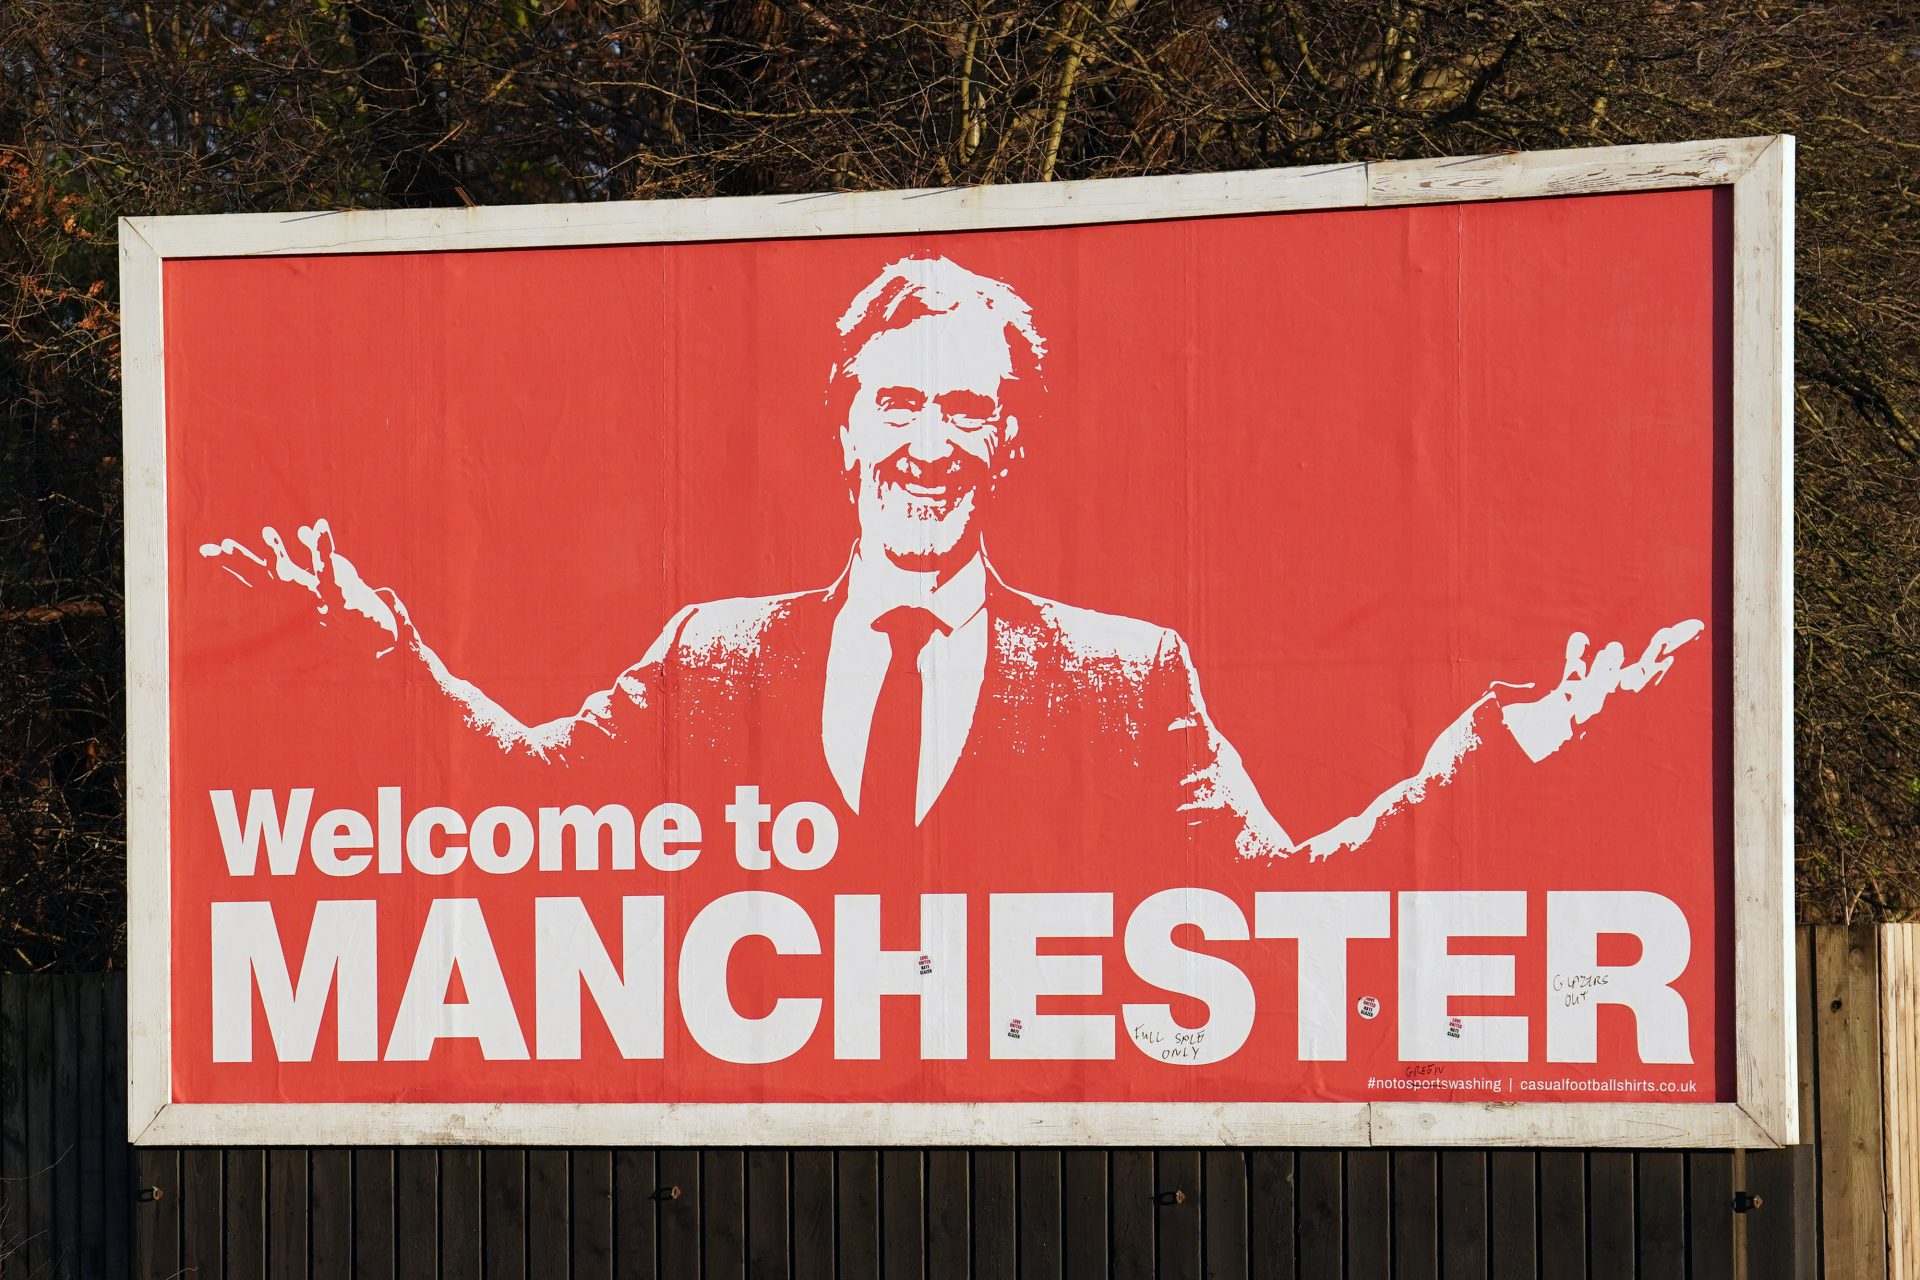 Manchester United takeover: Sir Jim Ratcliffe purchases $1.5bn worth of shares